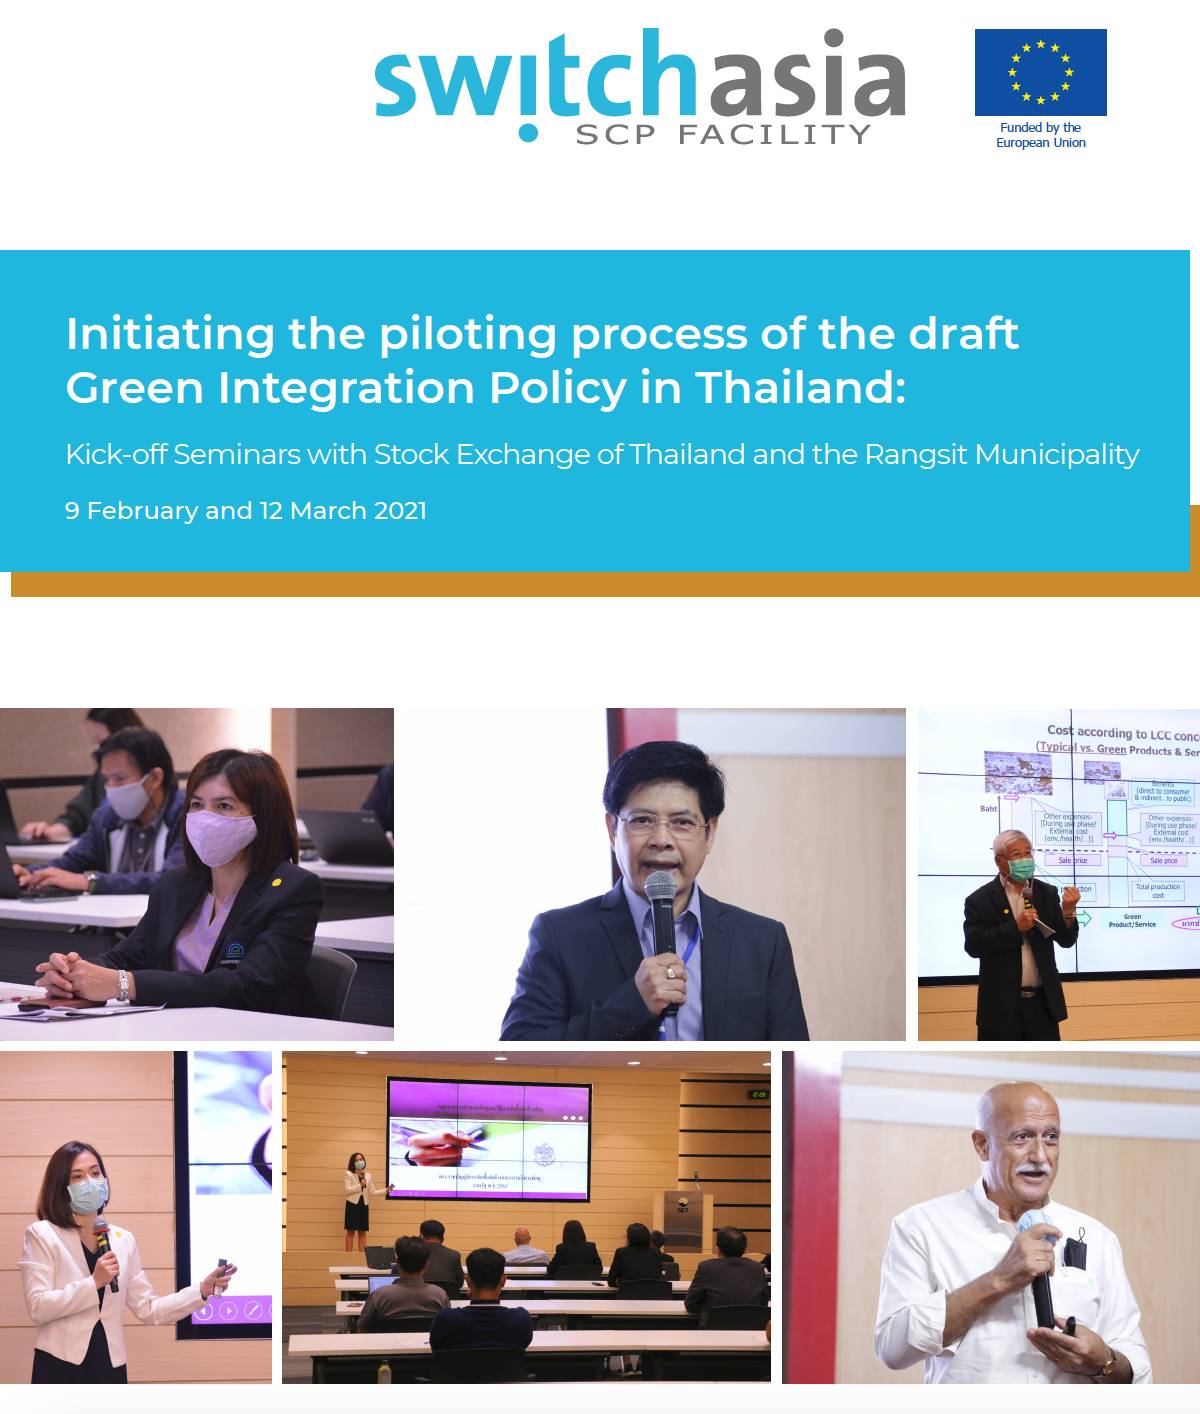 Initiating the piloting process of the draft Green Integration Policy in Thailand